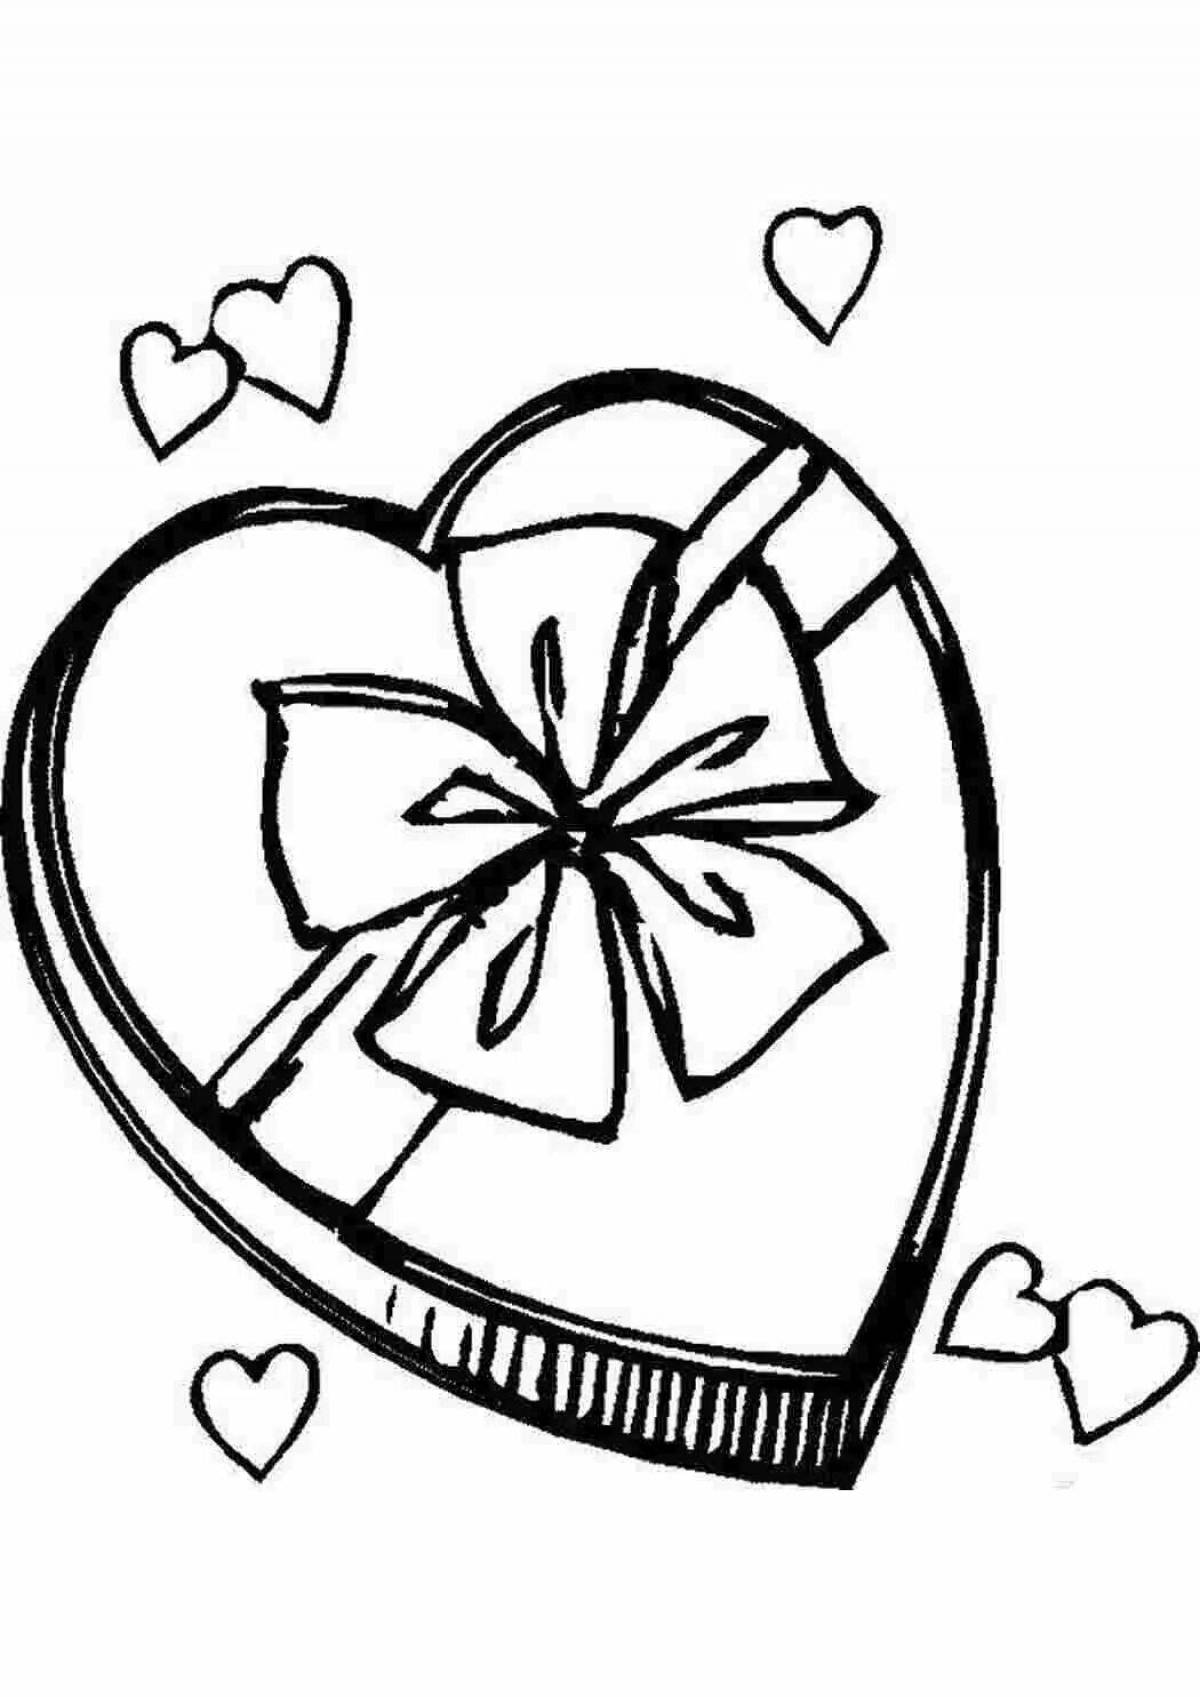 Playful heart and flower coloring page